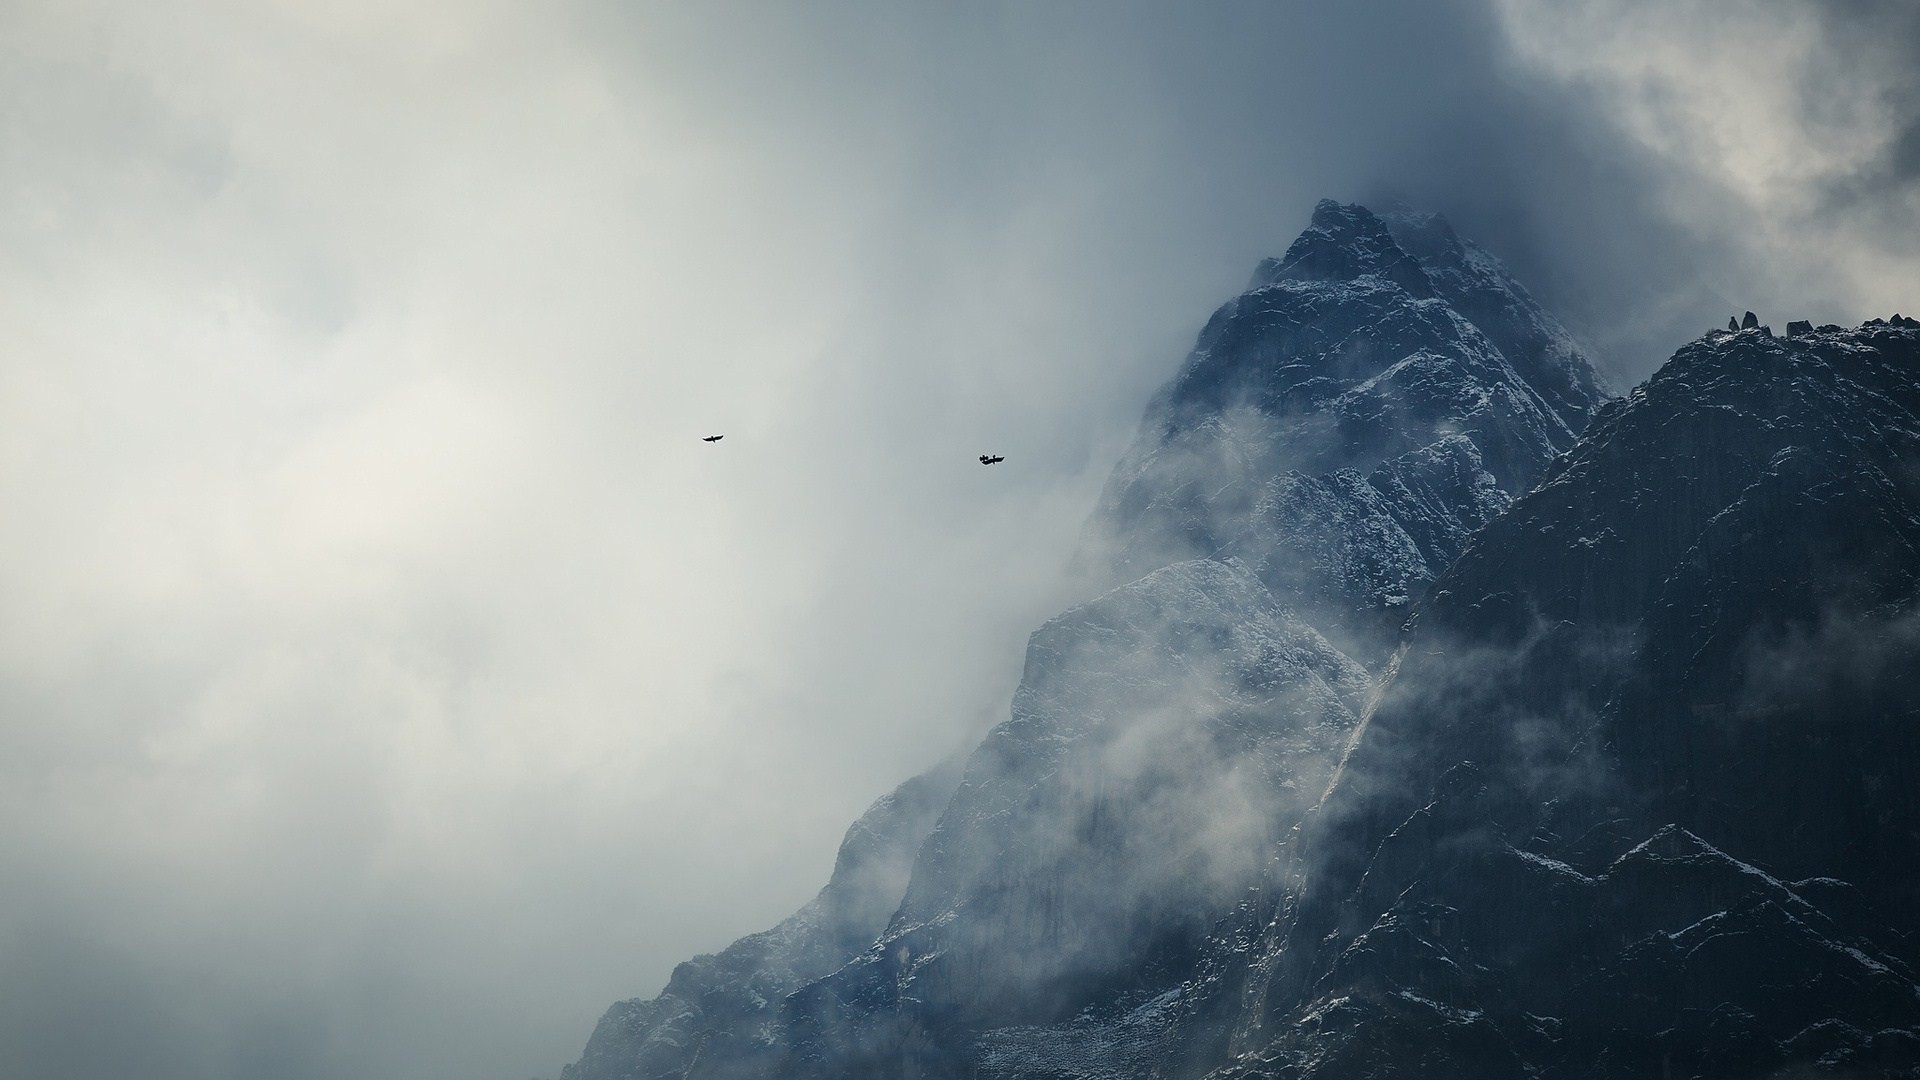 General 1920x1080 mist mountains nature